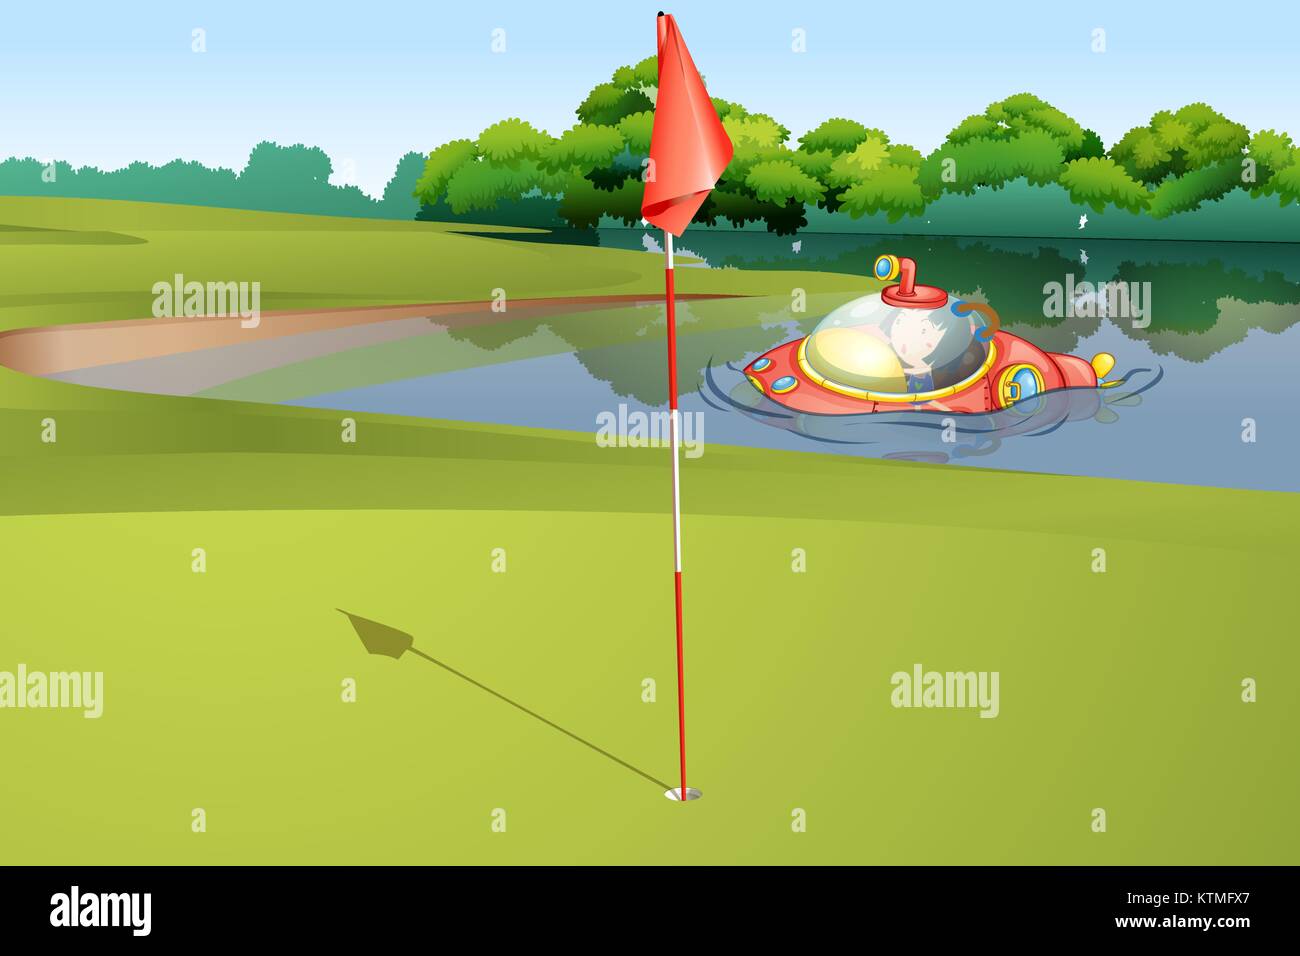 Illustration of  a submarine appearing at a golf course Stock Vector